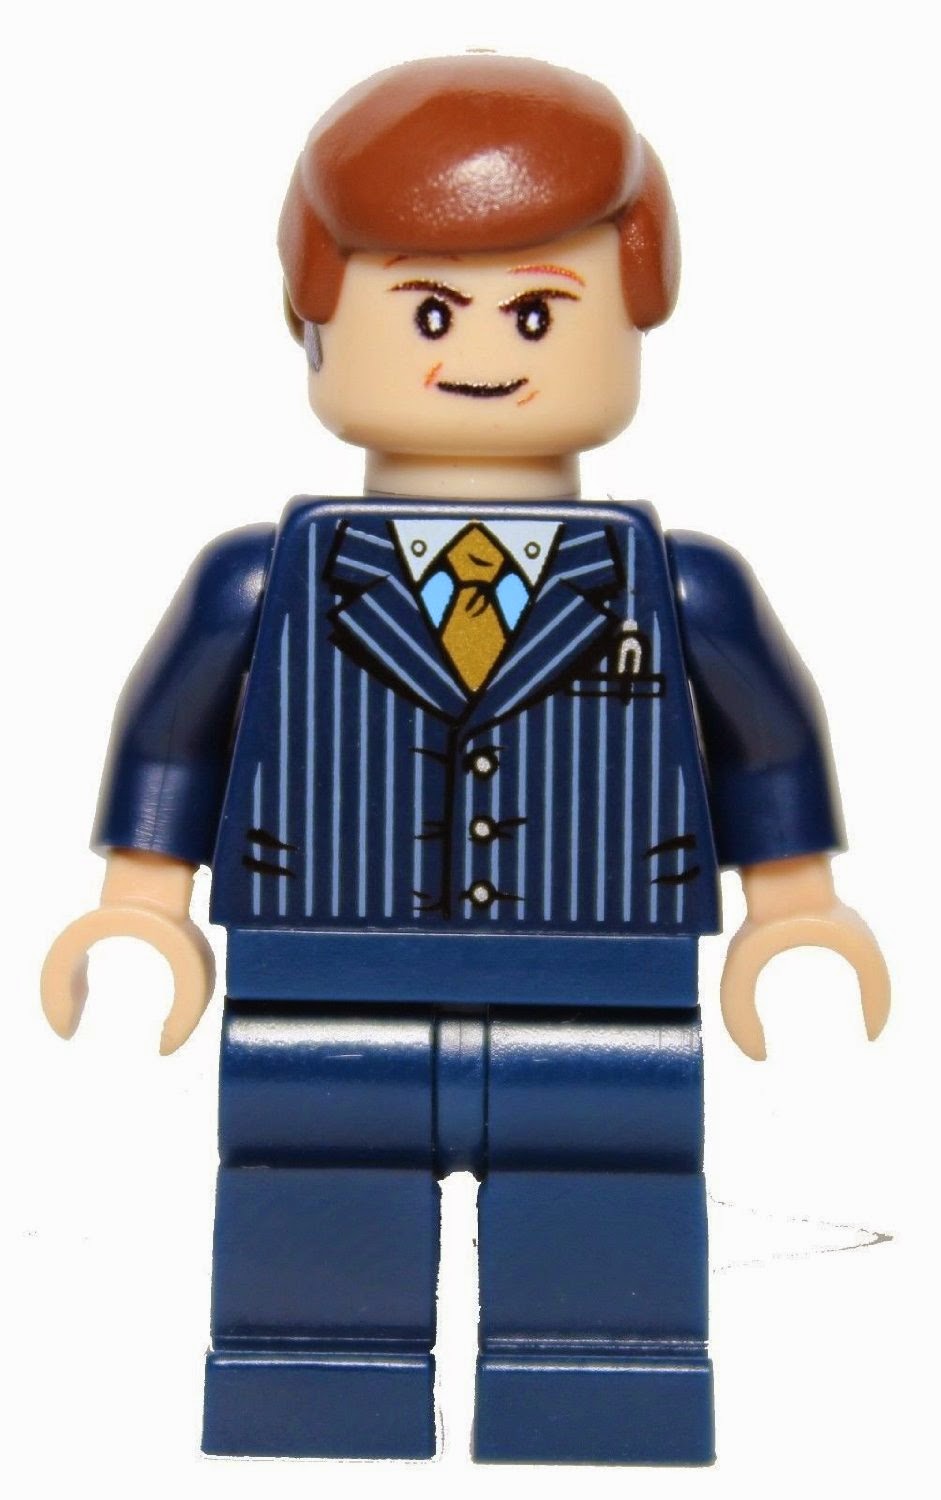 Lawyers Printed Saul Goodman Breaking Bad Lawyer Attorney Minifig Better Call Saul